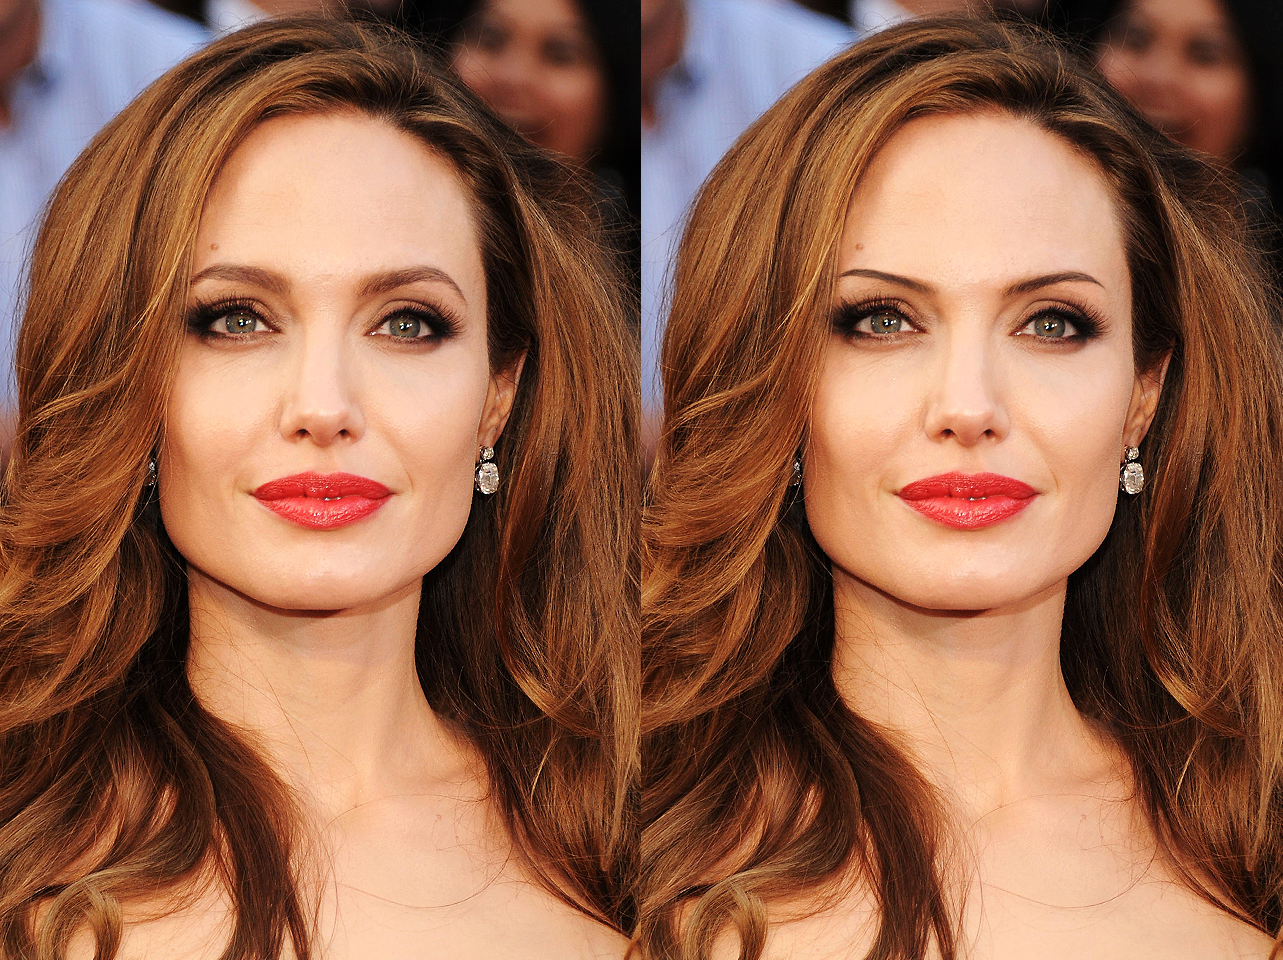 Angelina Jolie's original bold brows from 2012 vs a digitally edited thin-brow look | Source: Getty Images